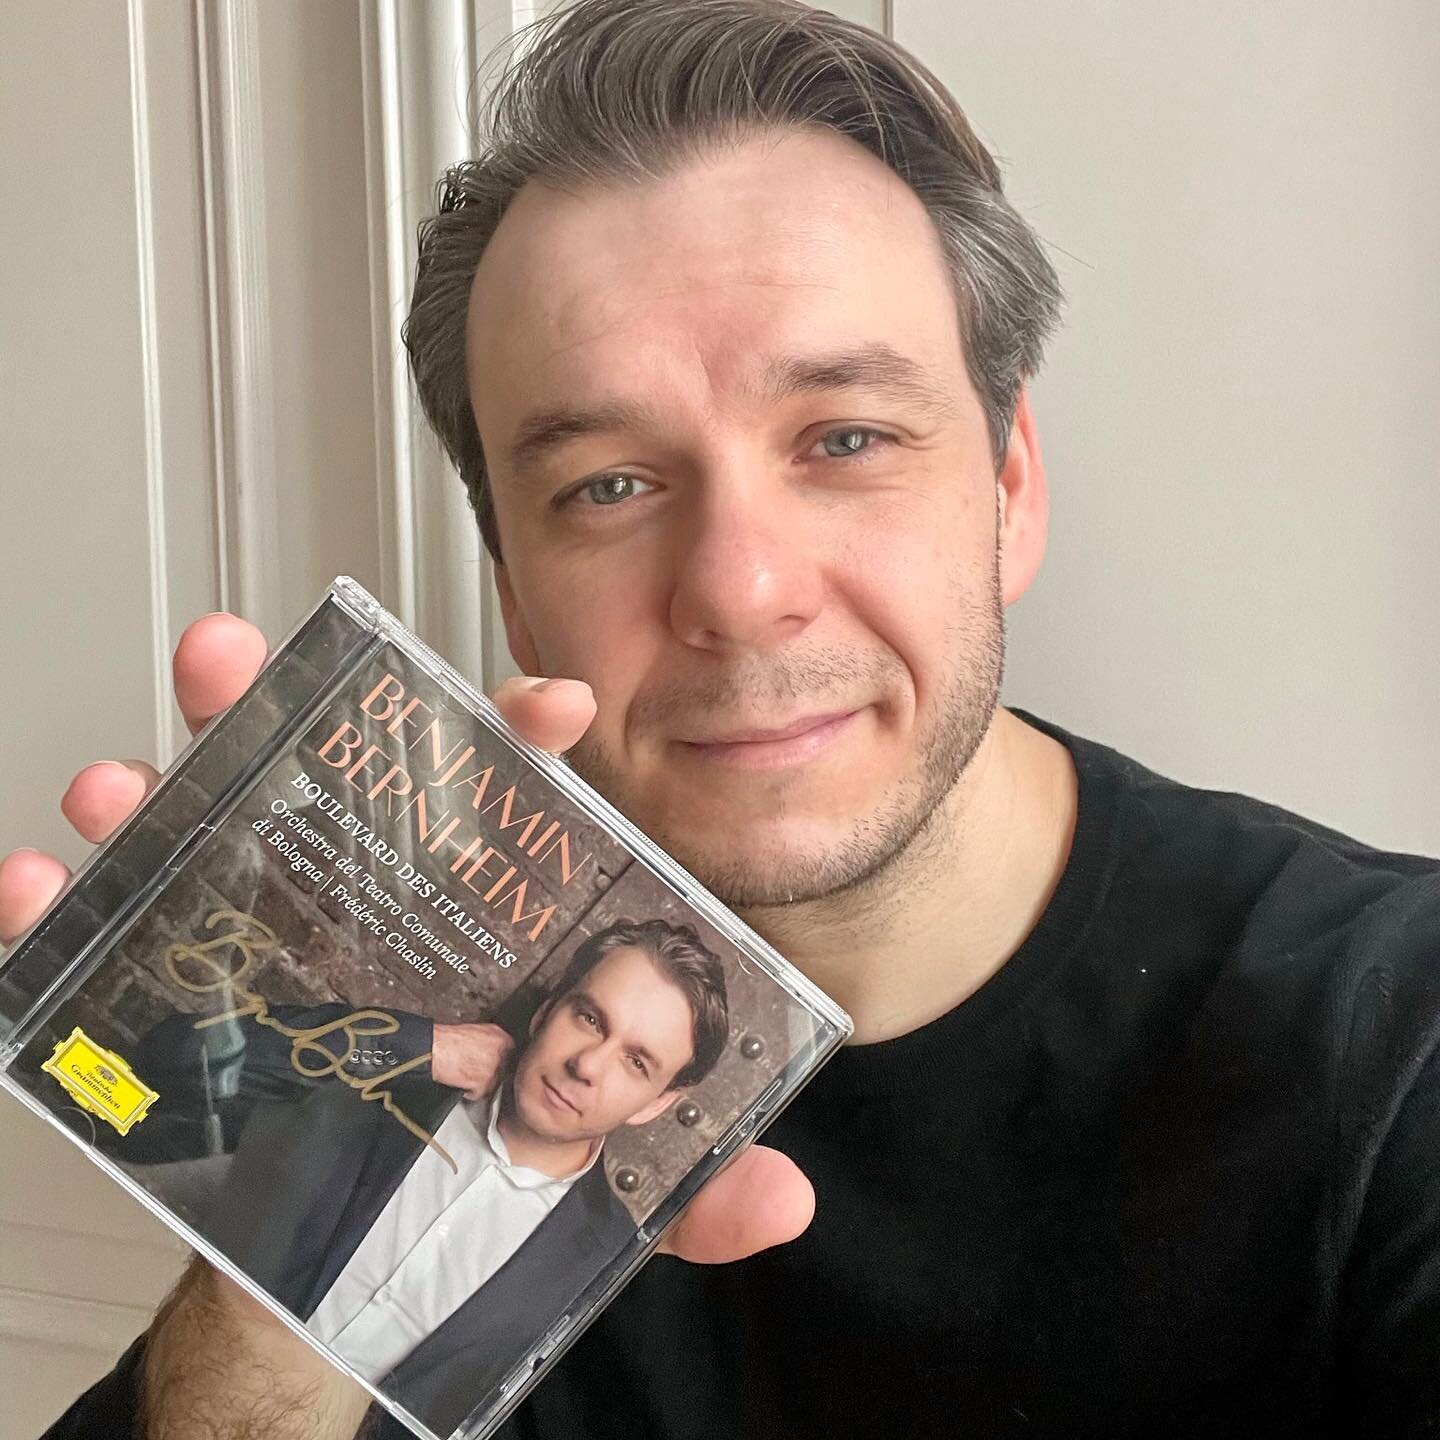 Tomorrow, my second cd, &ldquo;Boulevard des Italiens&rdquo; comes out! Join me today as I takeover my label @dgclassics &rsquo; instagram account&rsquo;s stories as I give you a peek behind-the-scenes during the recording, and more!

Enter to win th